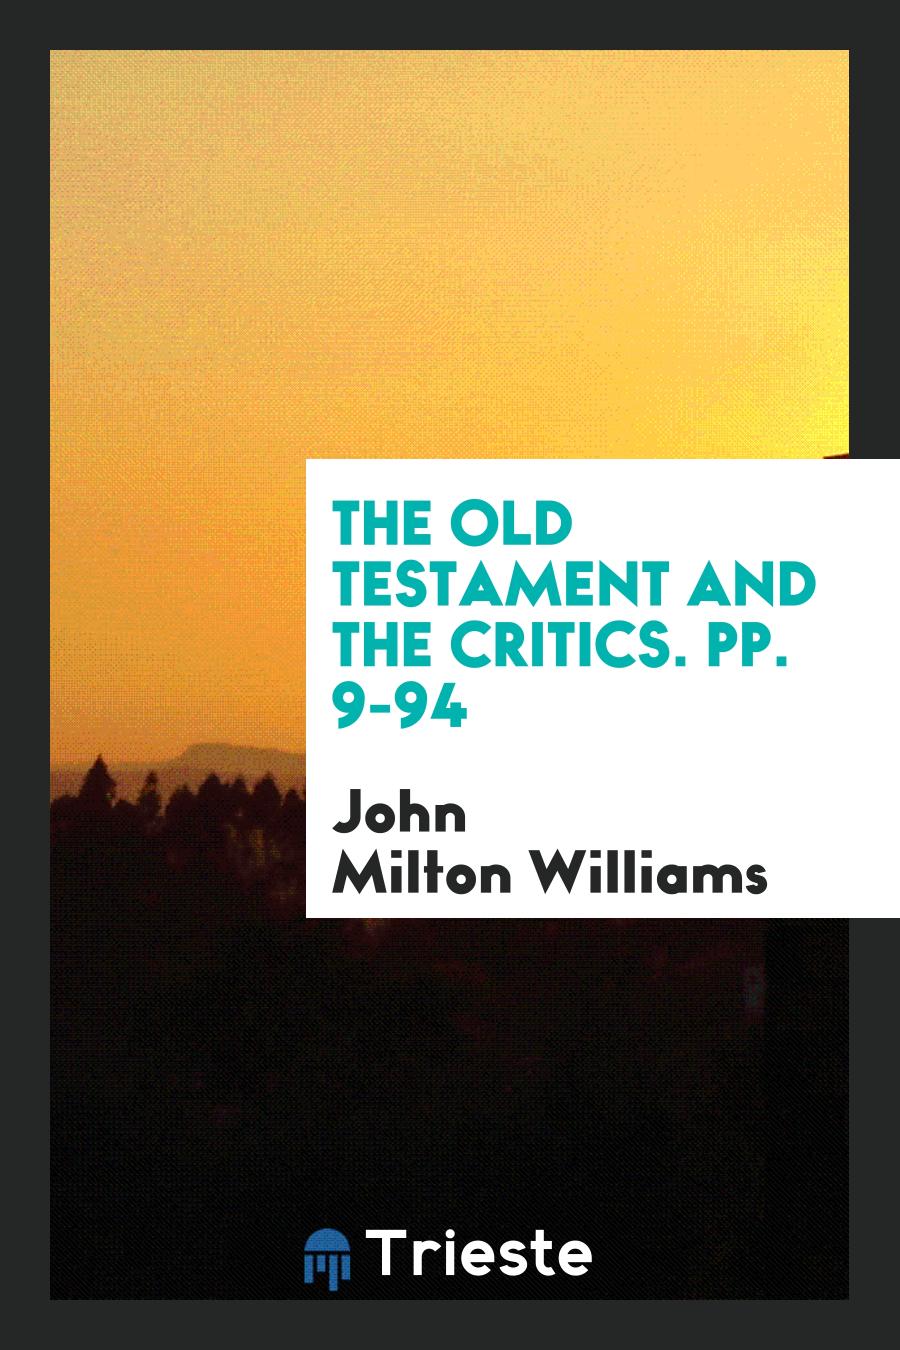 The Old Testament and the Critics. pp. 9-94